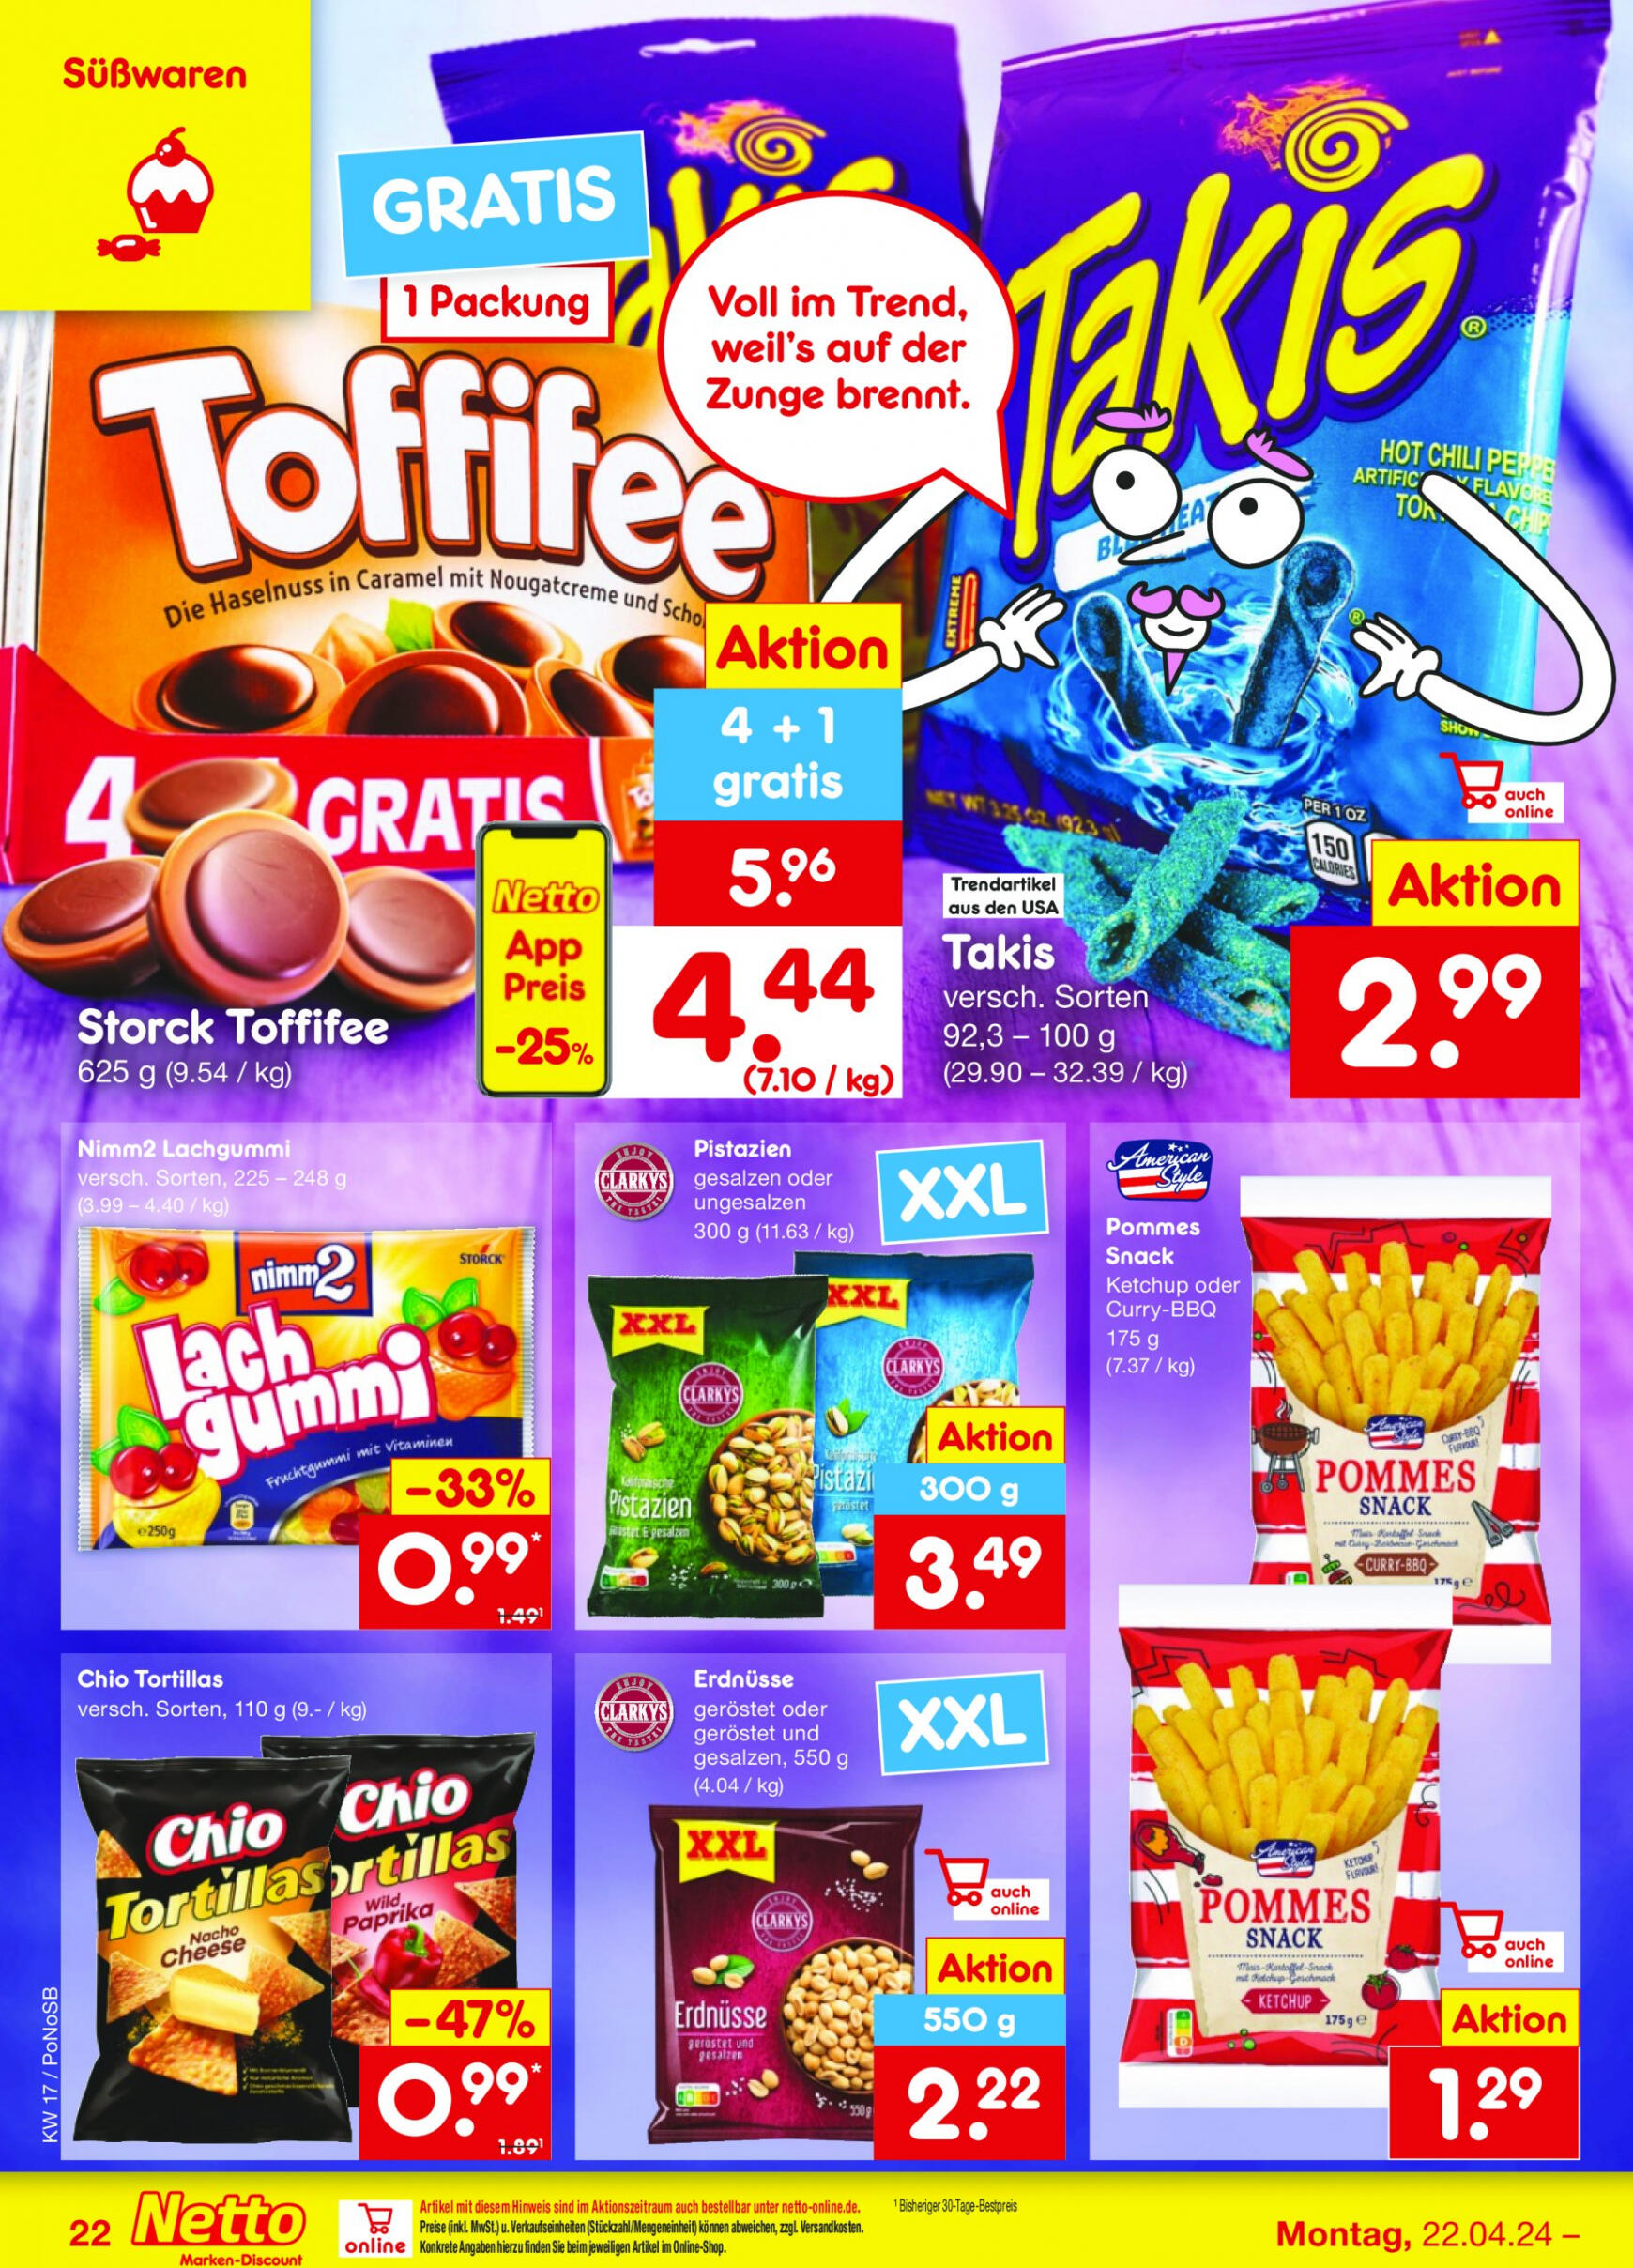 netto - Flyer Netto aktuell 22.04. - 27.04. - page: 24